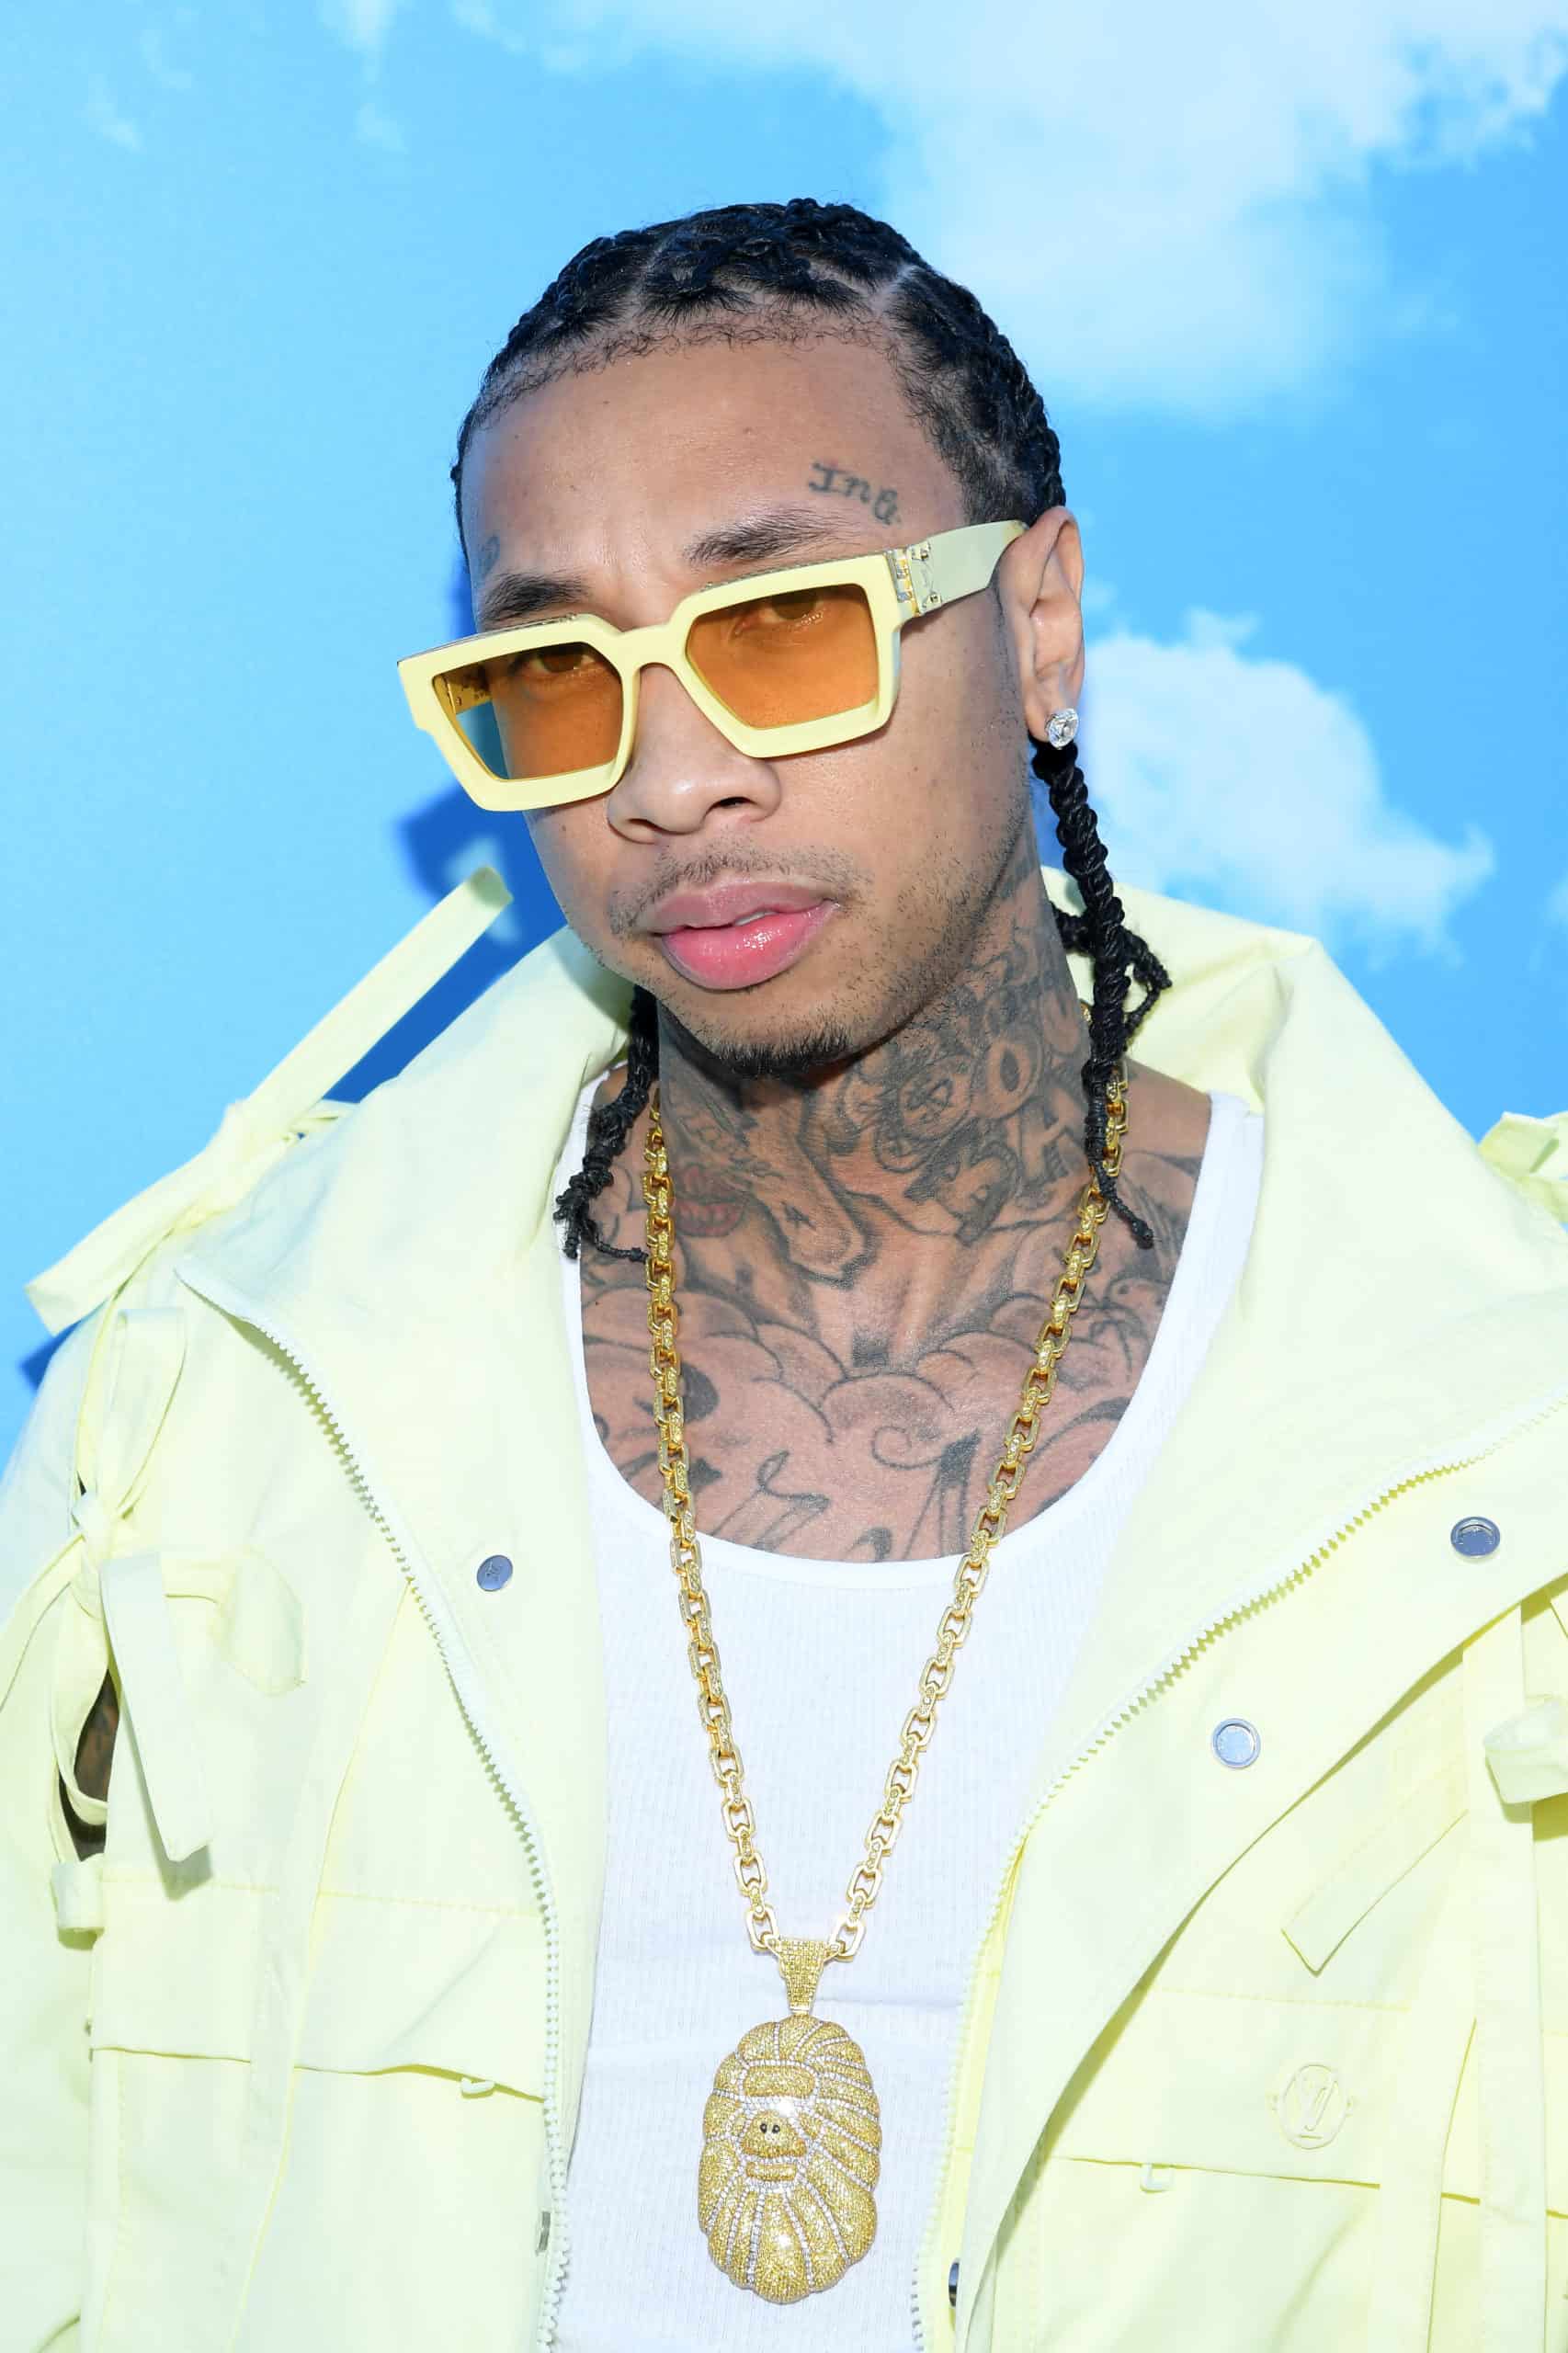 Management company onlyfans Tyga Launches